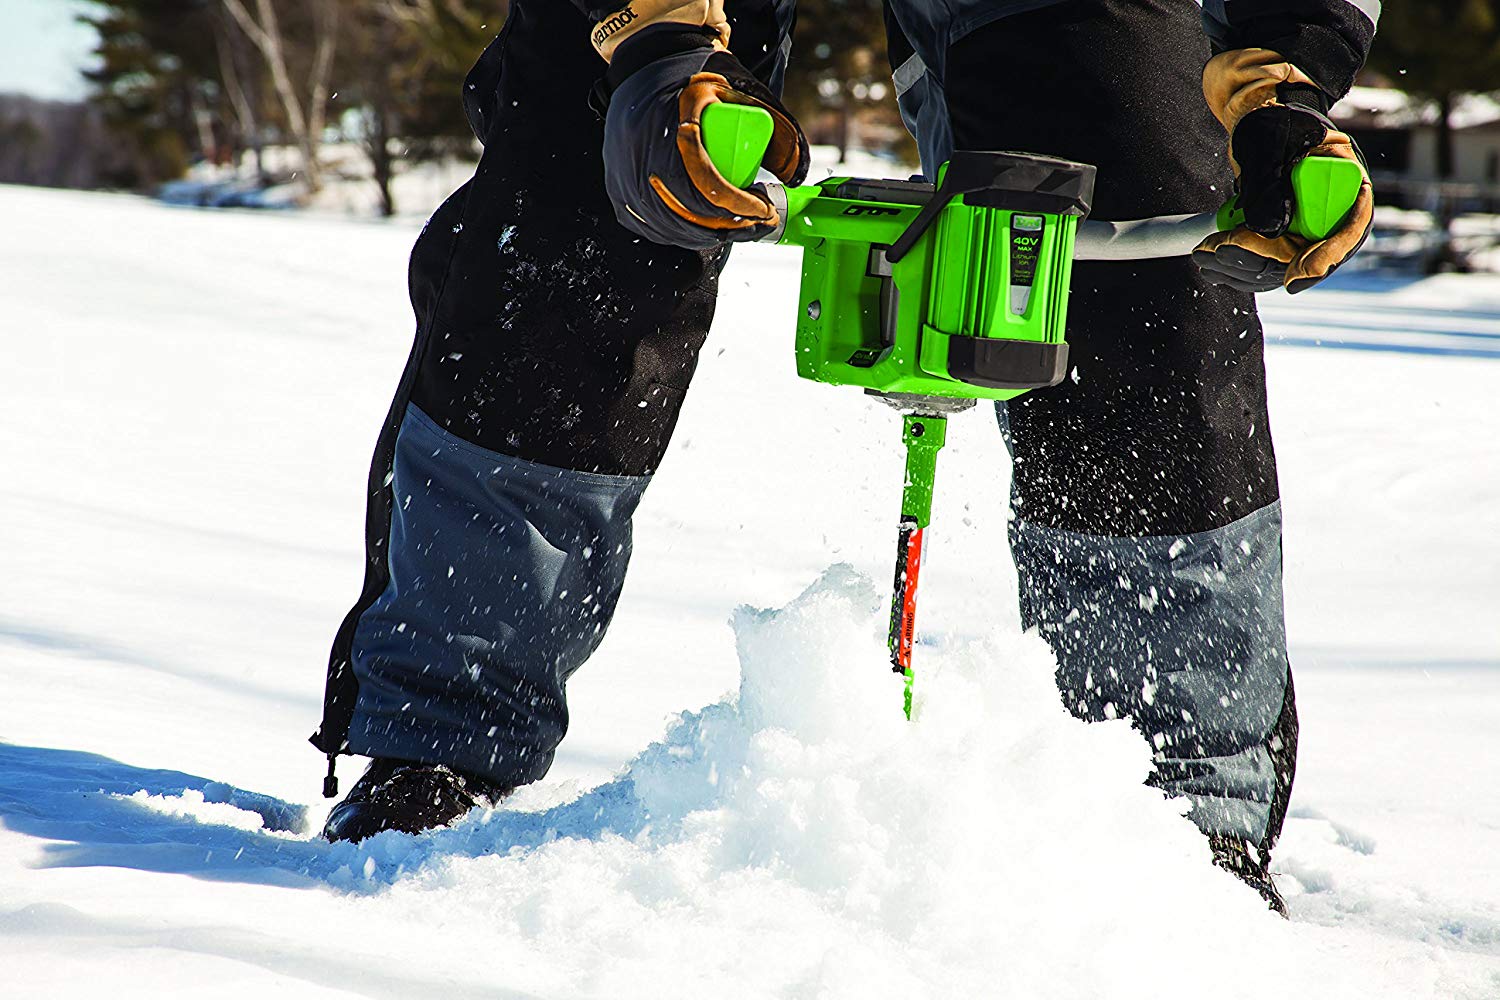 Best Cordless Drill for Ice Auger